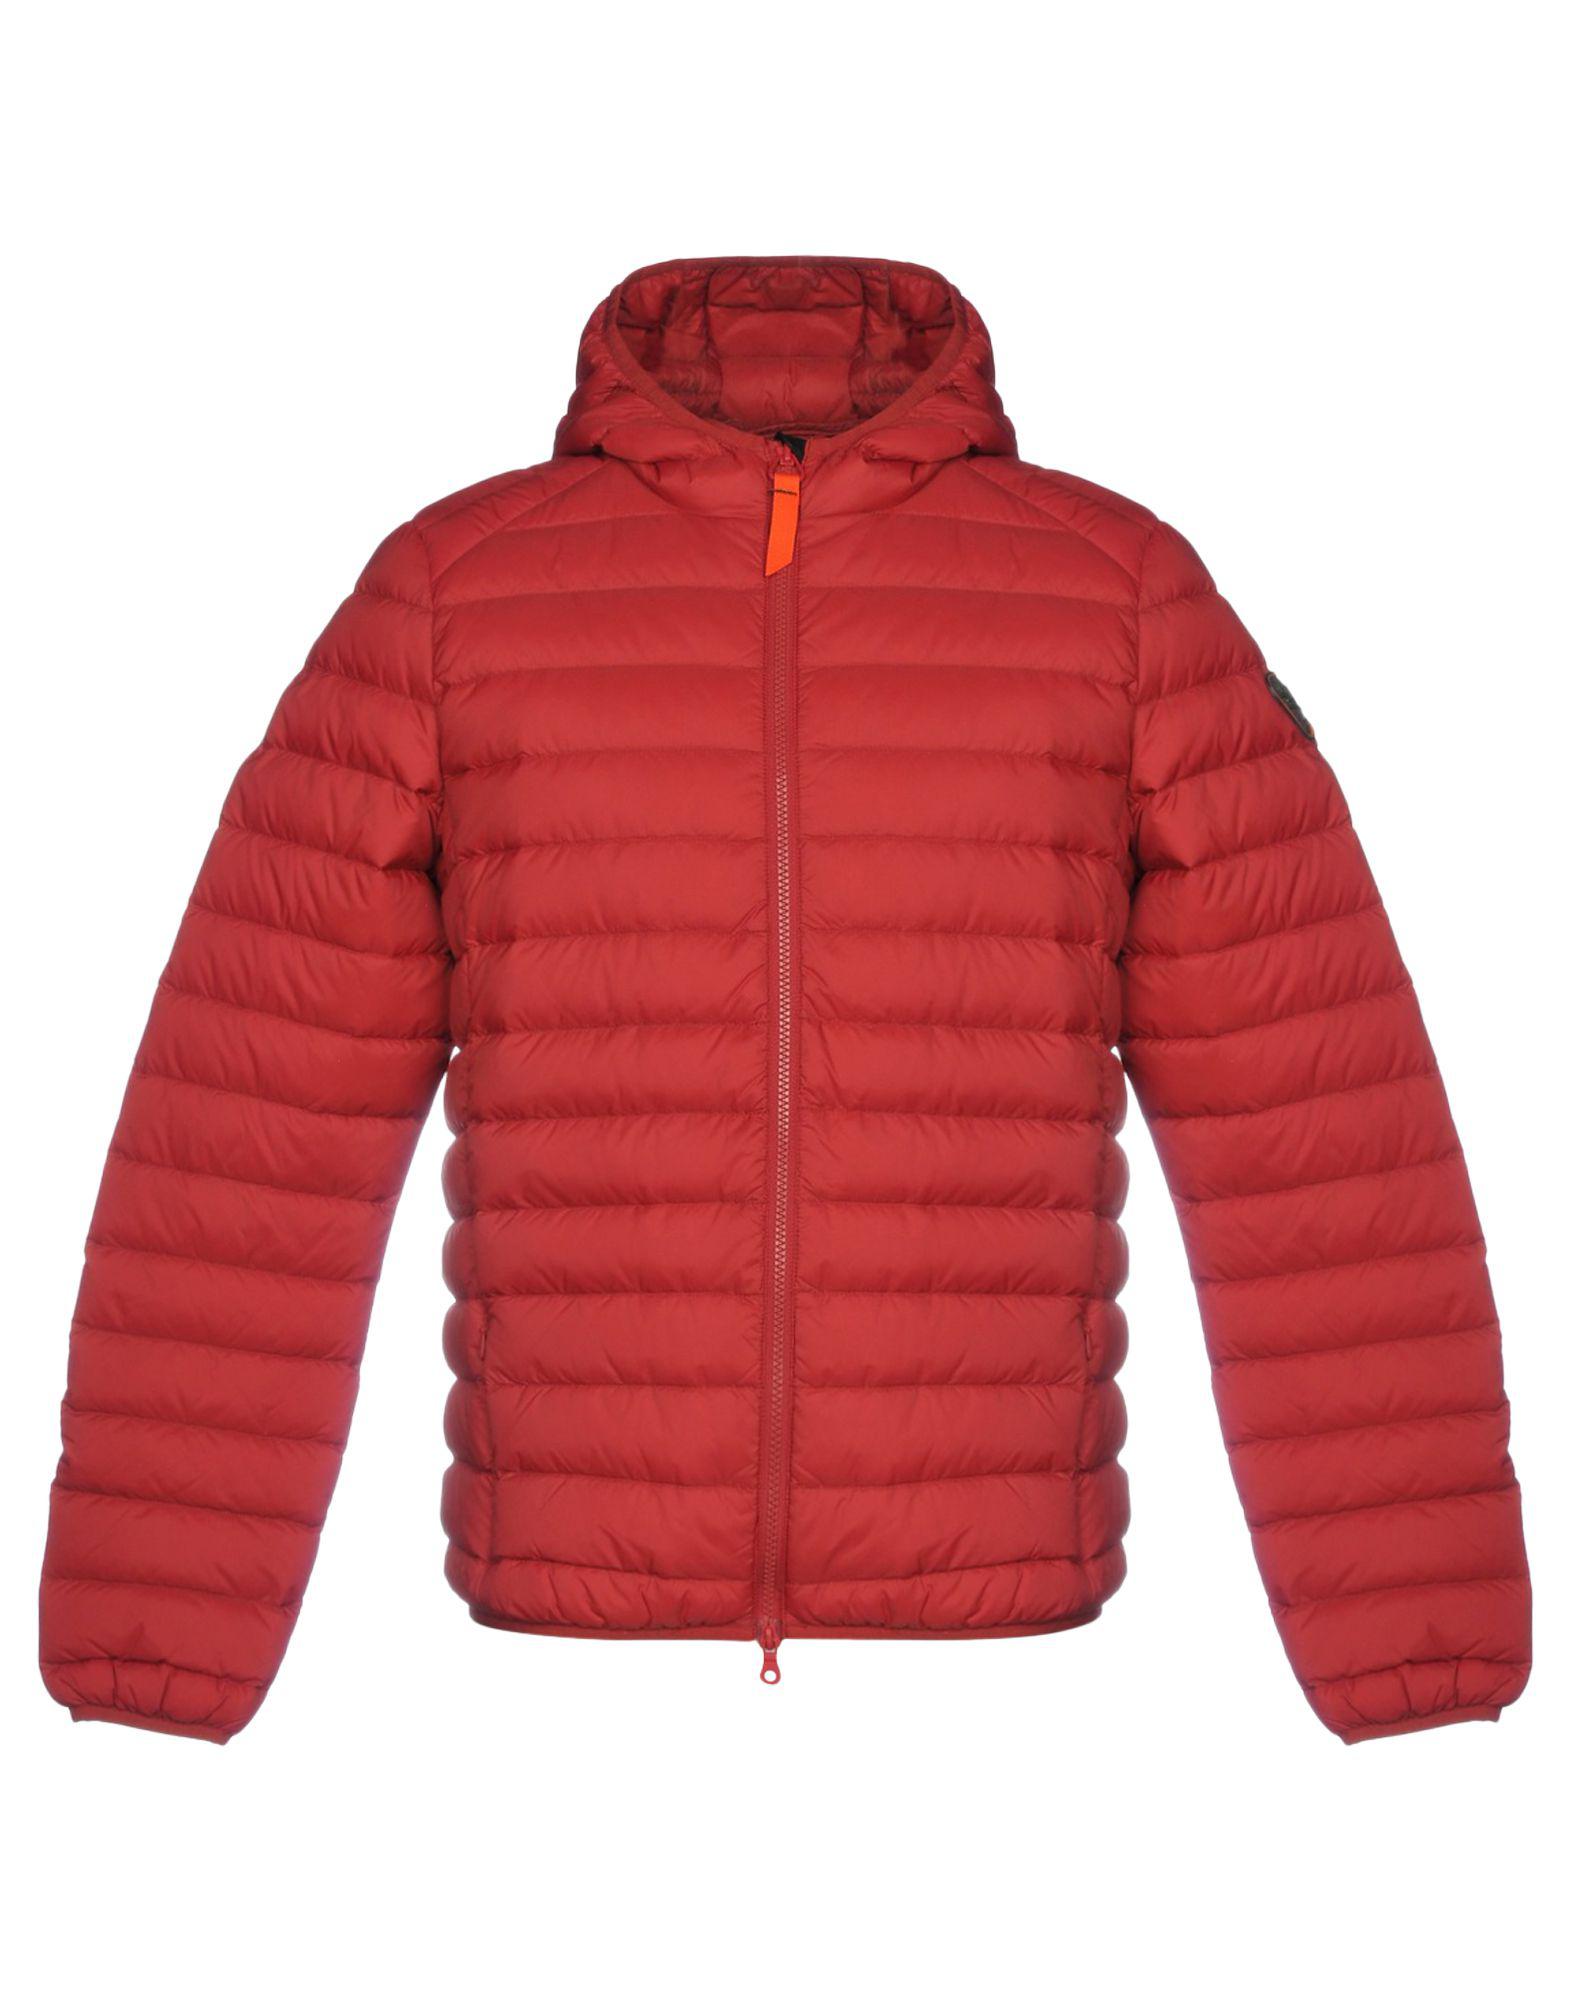 Gertrude + Gaston Synthetic Down Jacket in Red for Men - Lyst